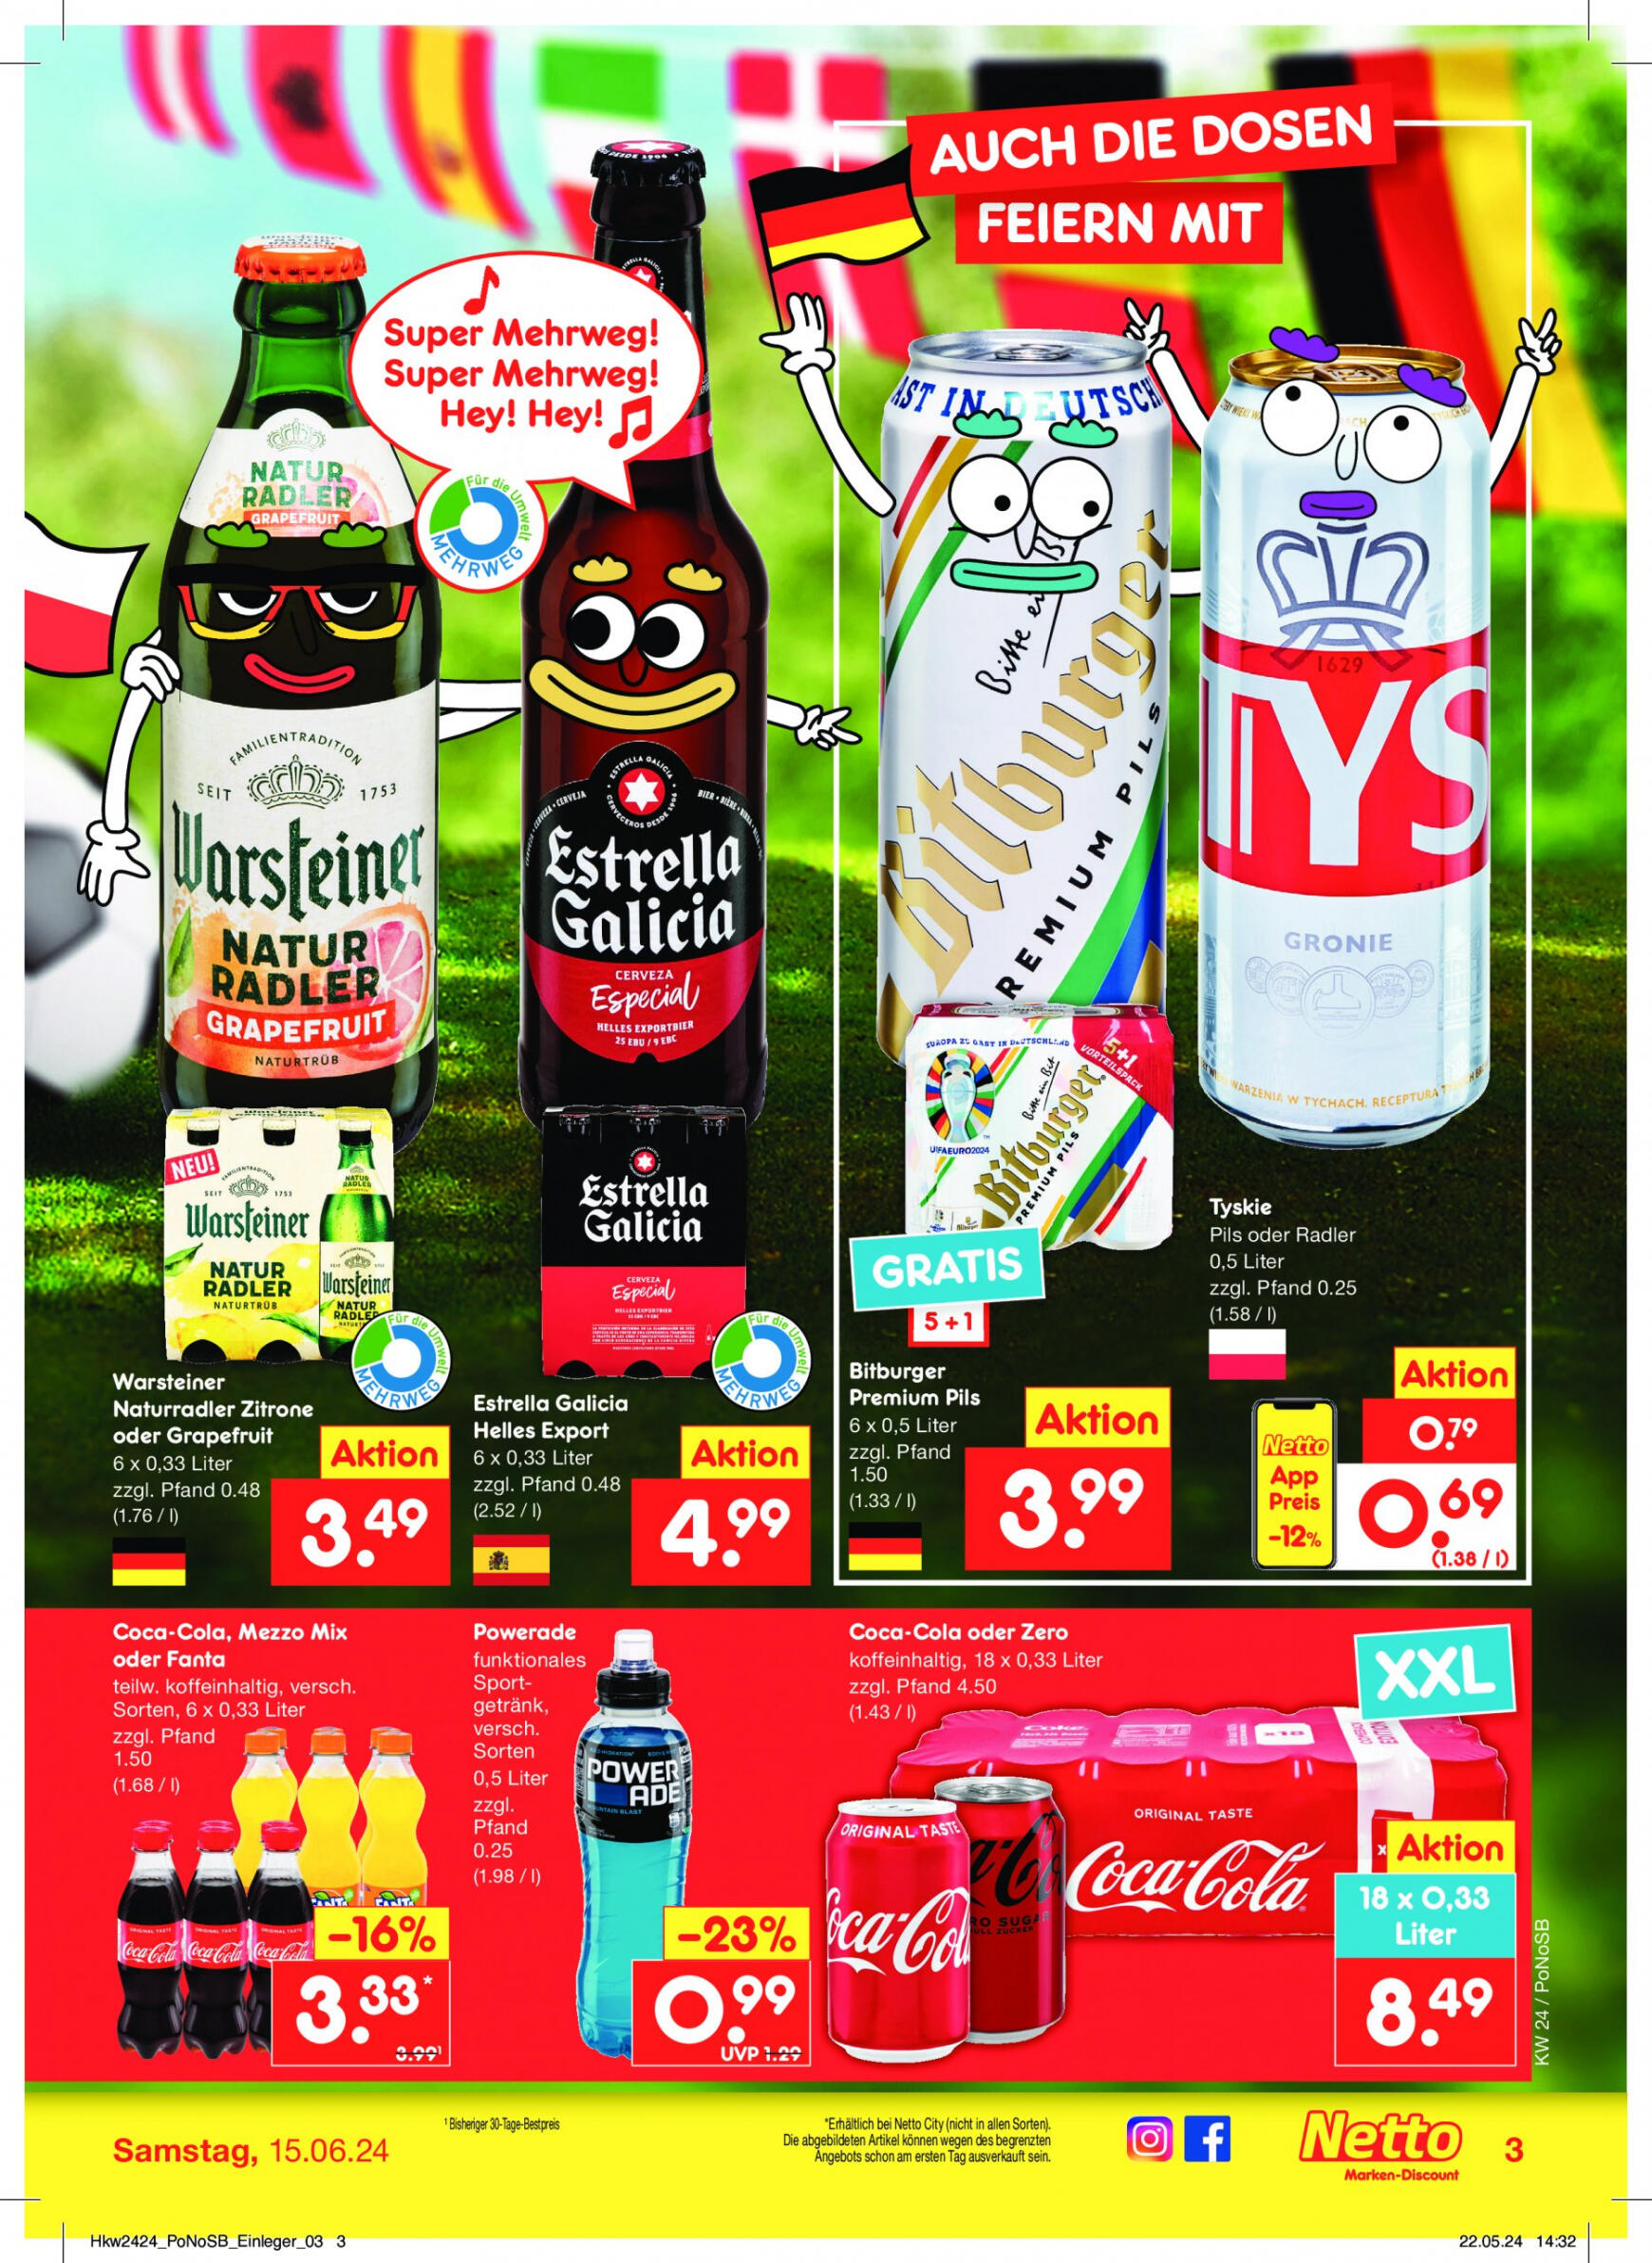 netto - Flyer Netto aktuell 10.06. - 15.06. - page: 21